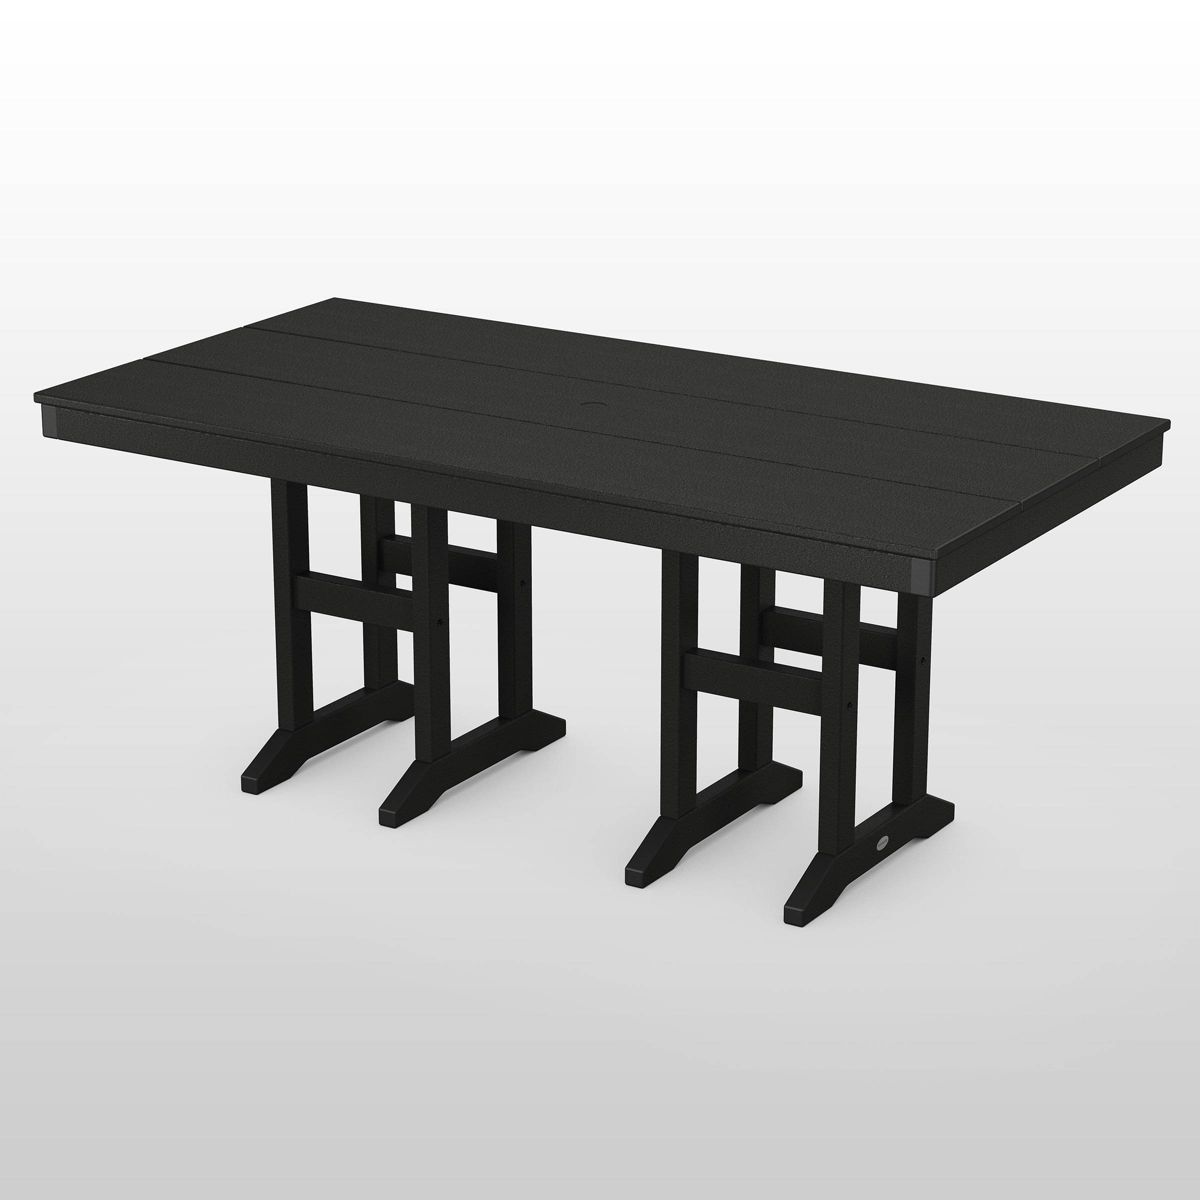 Moore POLYWOOD 35" x 70" Farmhouse Rectangle Patio Dining Table - Threshold™ | Target